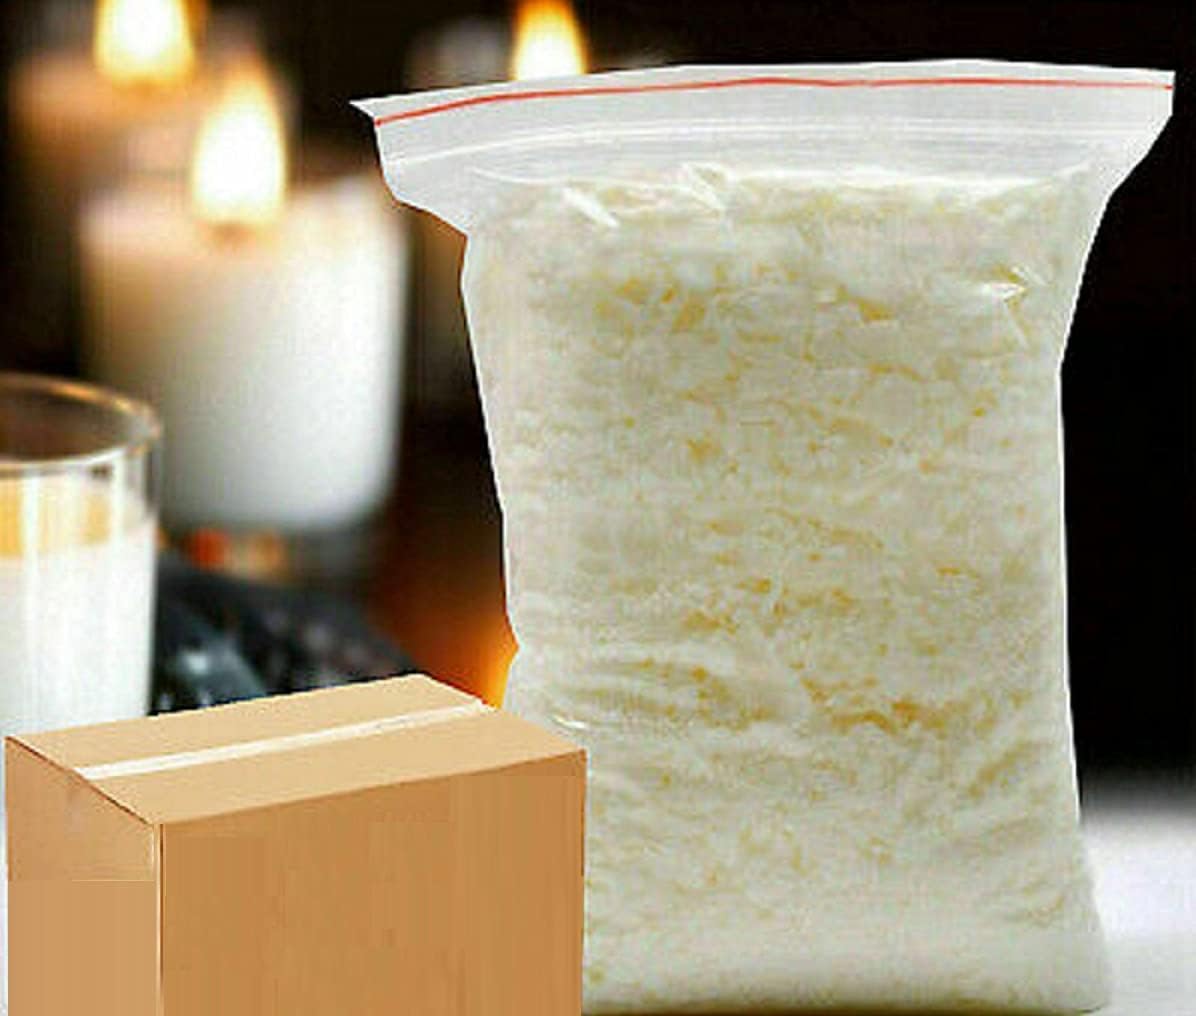 Craftbud DIY Natural Soy Candle Wax for Candle Making with Bulk Candle Making Supplies, 30 lbs. Soy Wax Flakes, Supplies Included, Size: 30 lb Candle